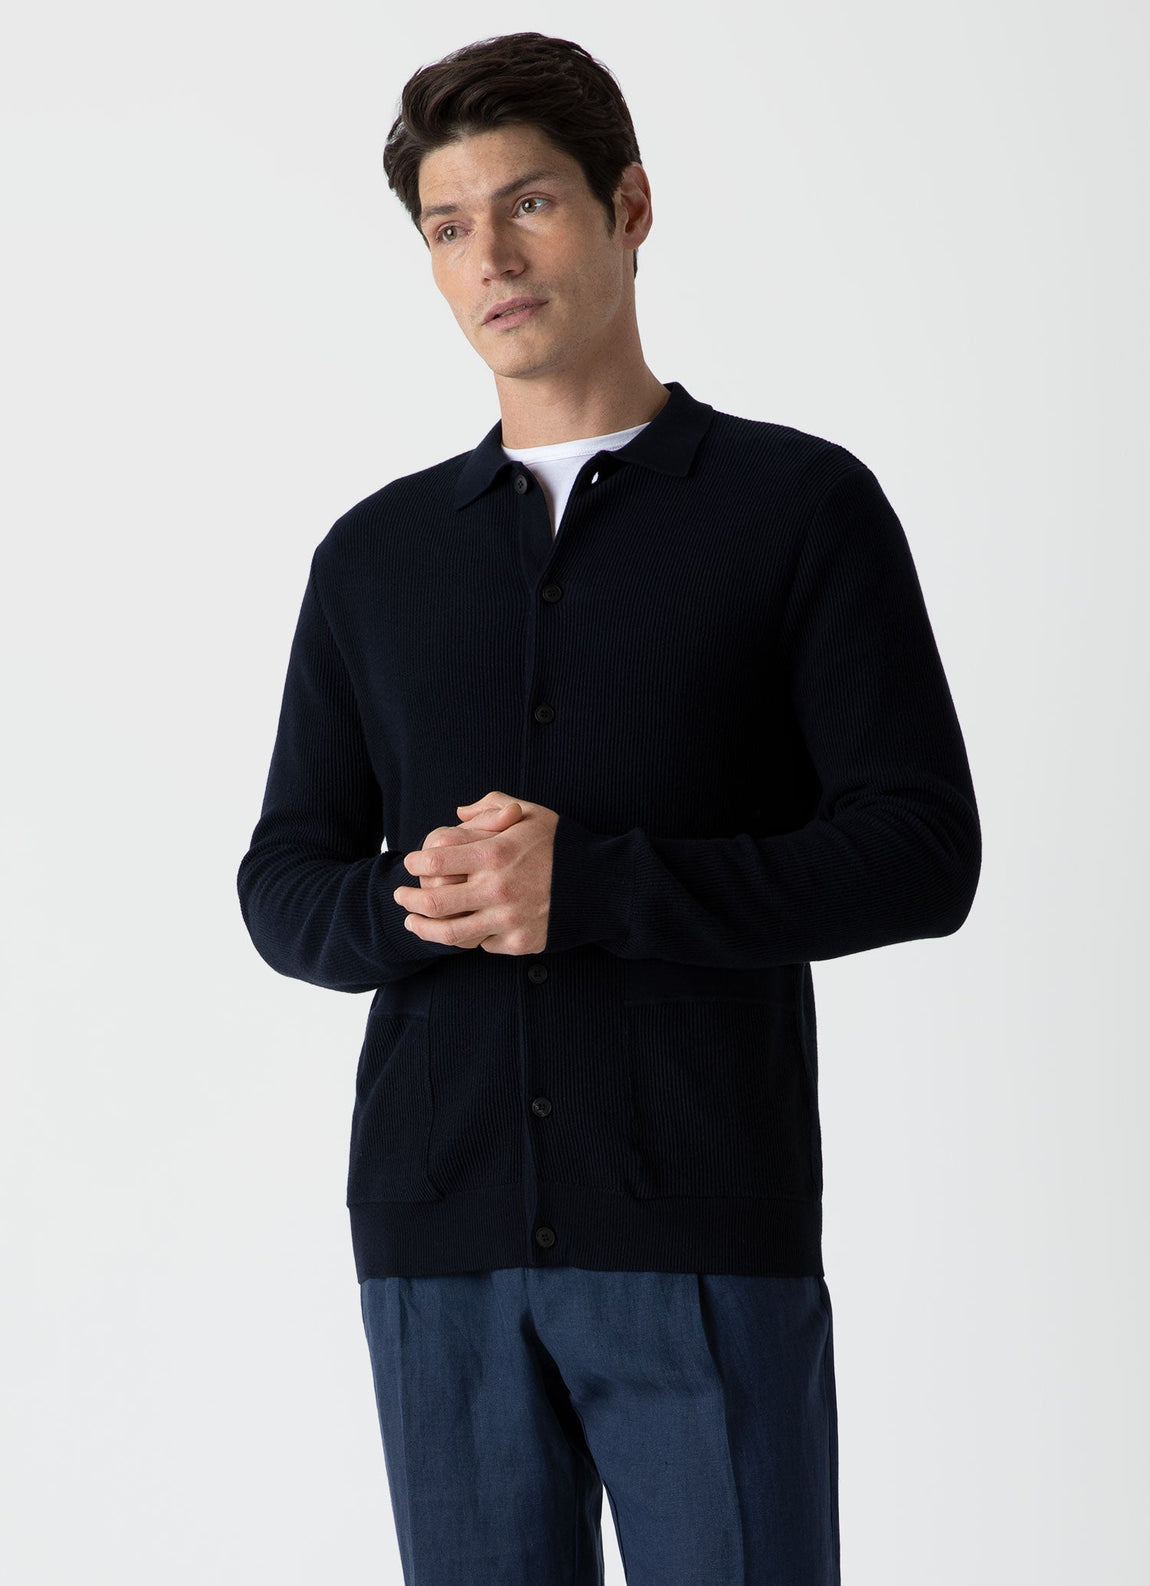 Men's Knitted Jacket in Navy